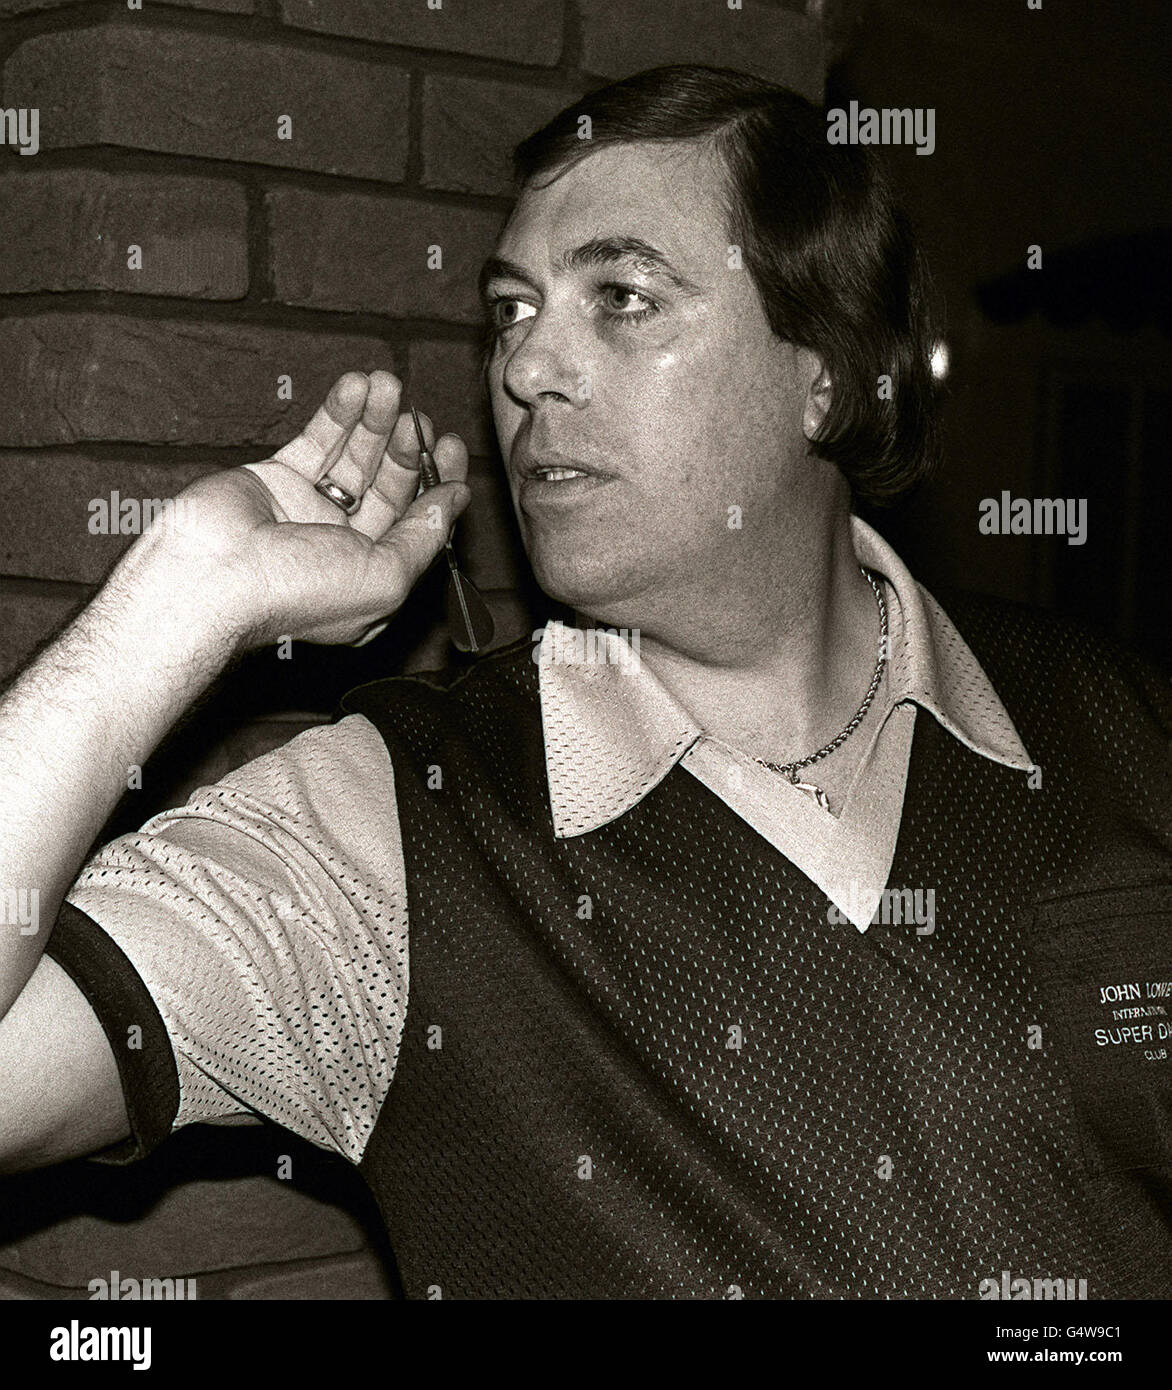 John Lowe, from Chesterfield, one of England's top darts players. A former World Champion he holds the News of the World and the World Cup singles titles. Stock Photo